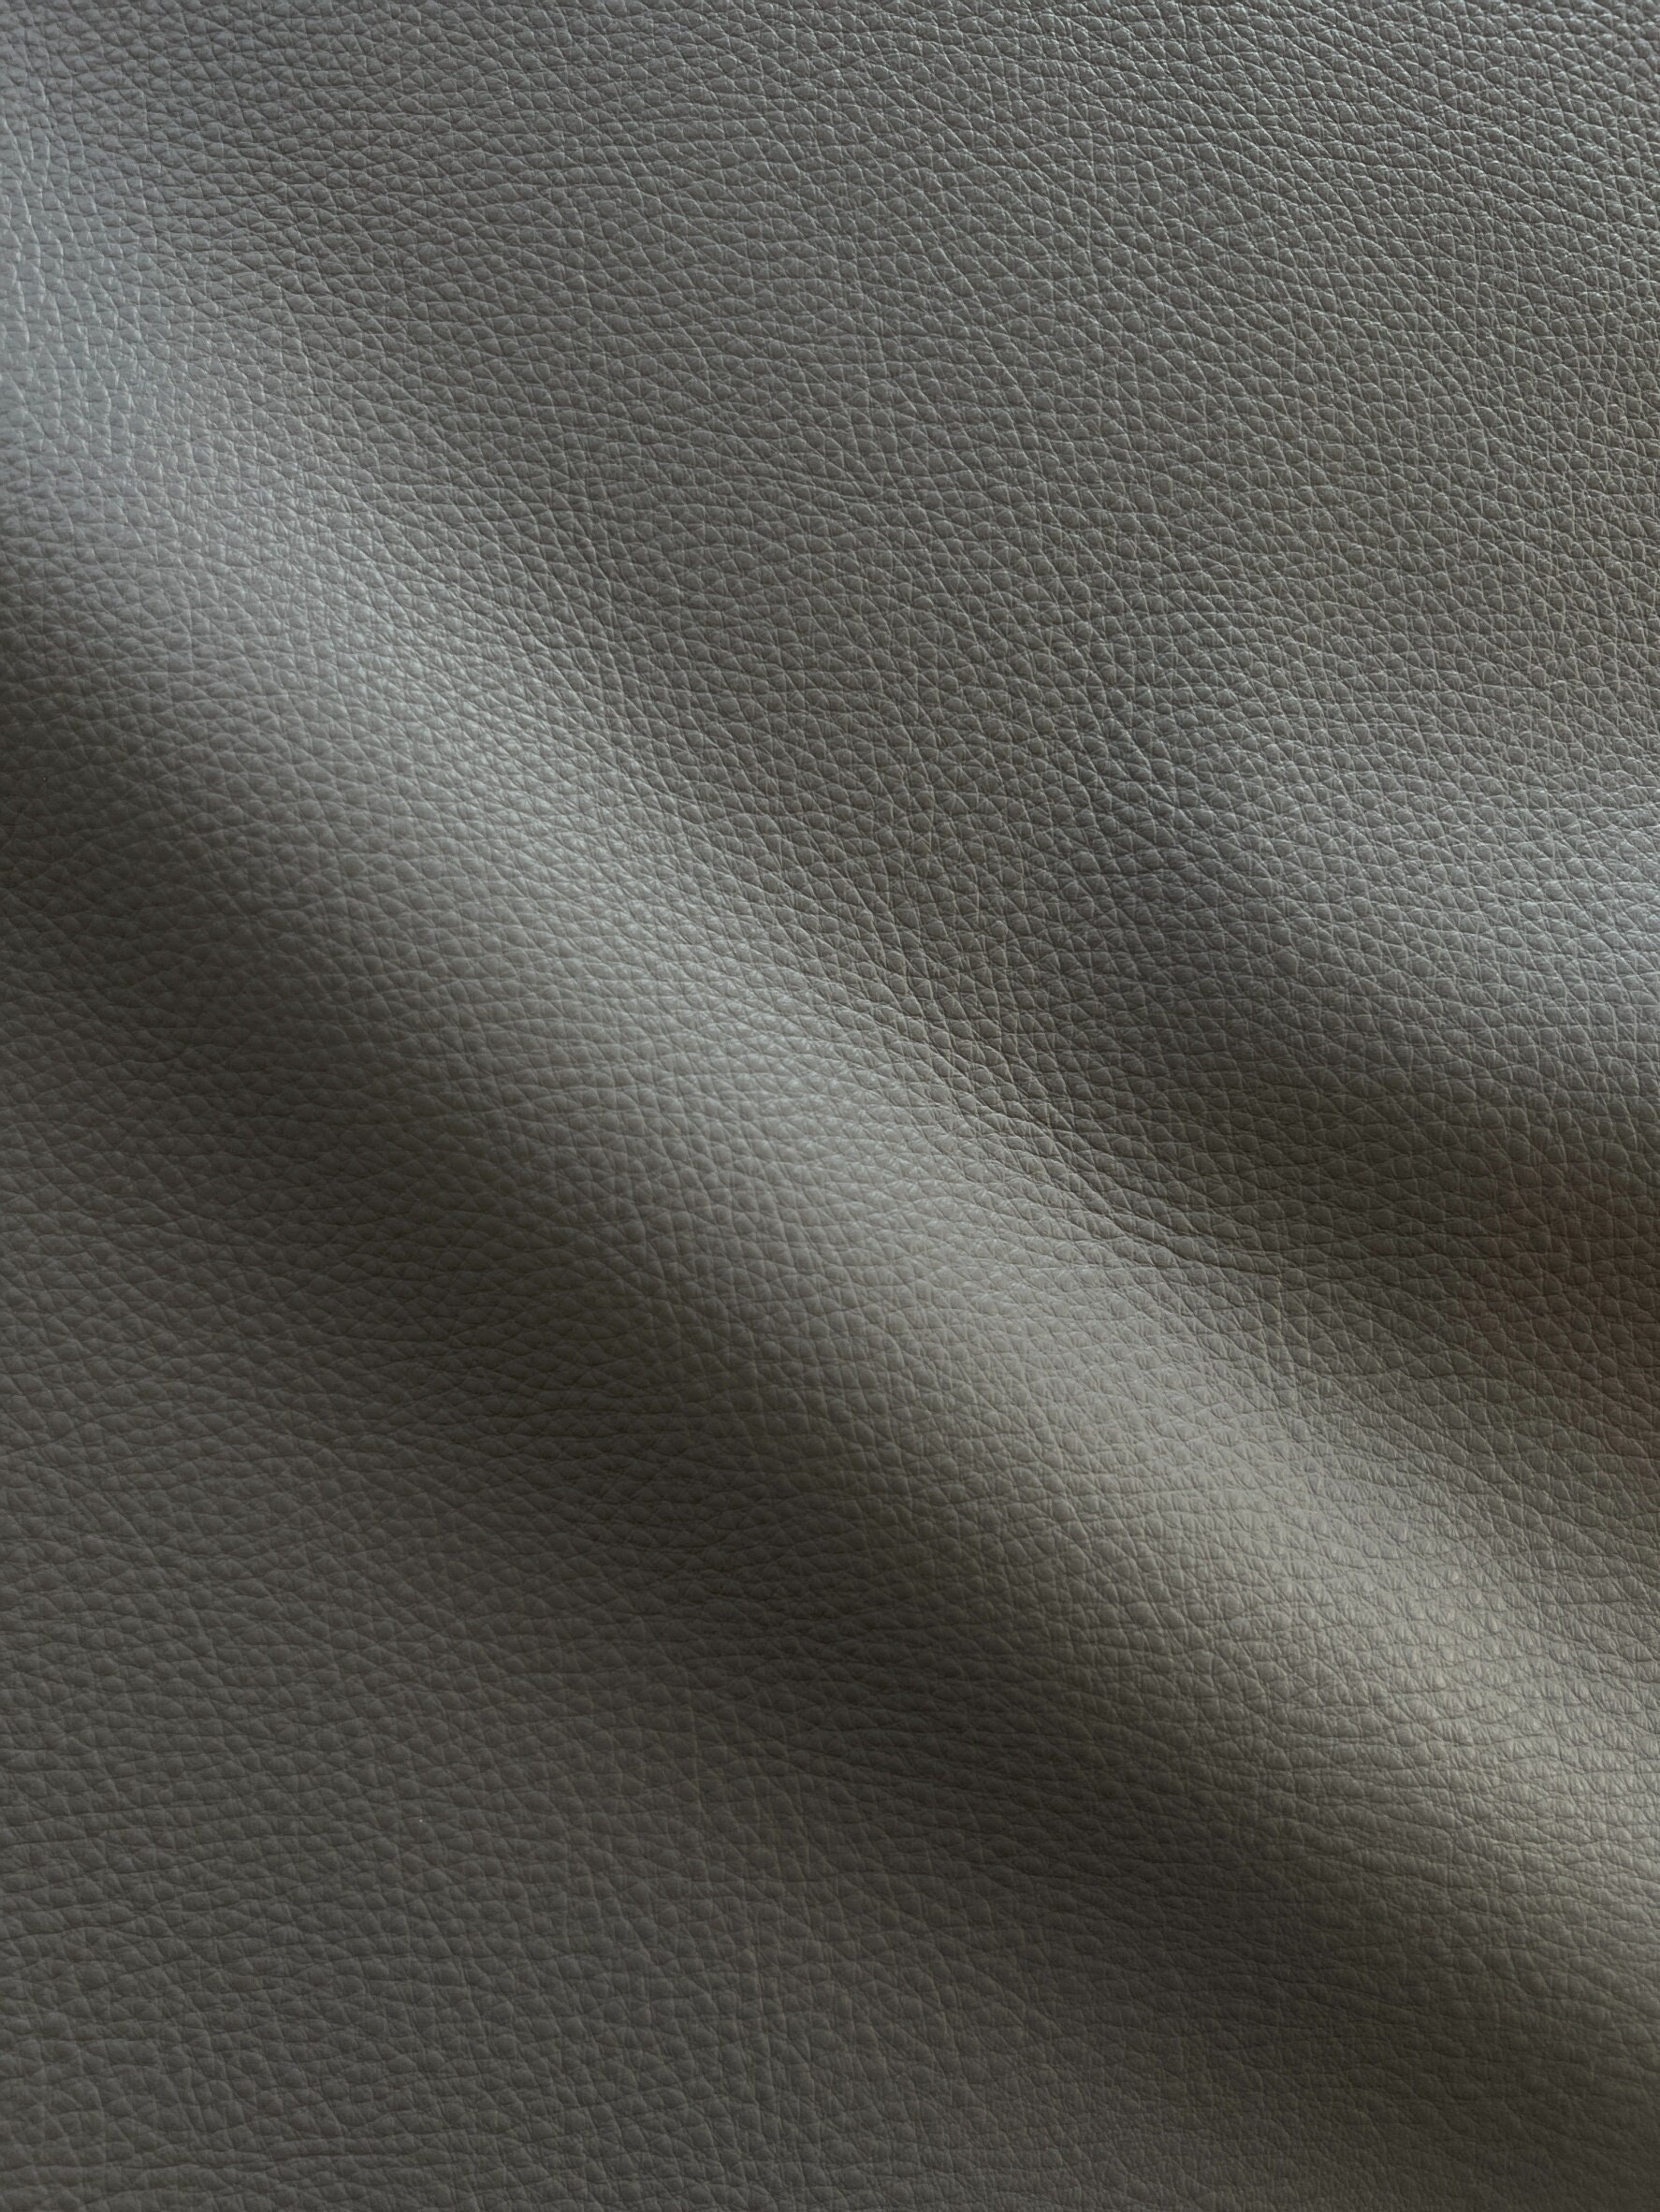 Faux Leather Upholstery Fabric, Thick Durable Synthetic Leather Vinyl, Soft  Touch Distressed DIY and Craft Material - Cut by The Yard (Grey)